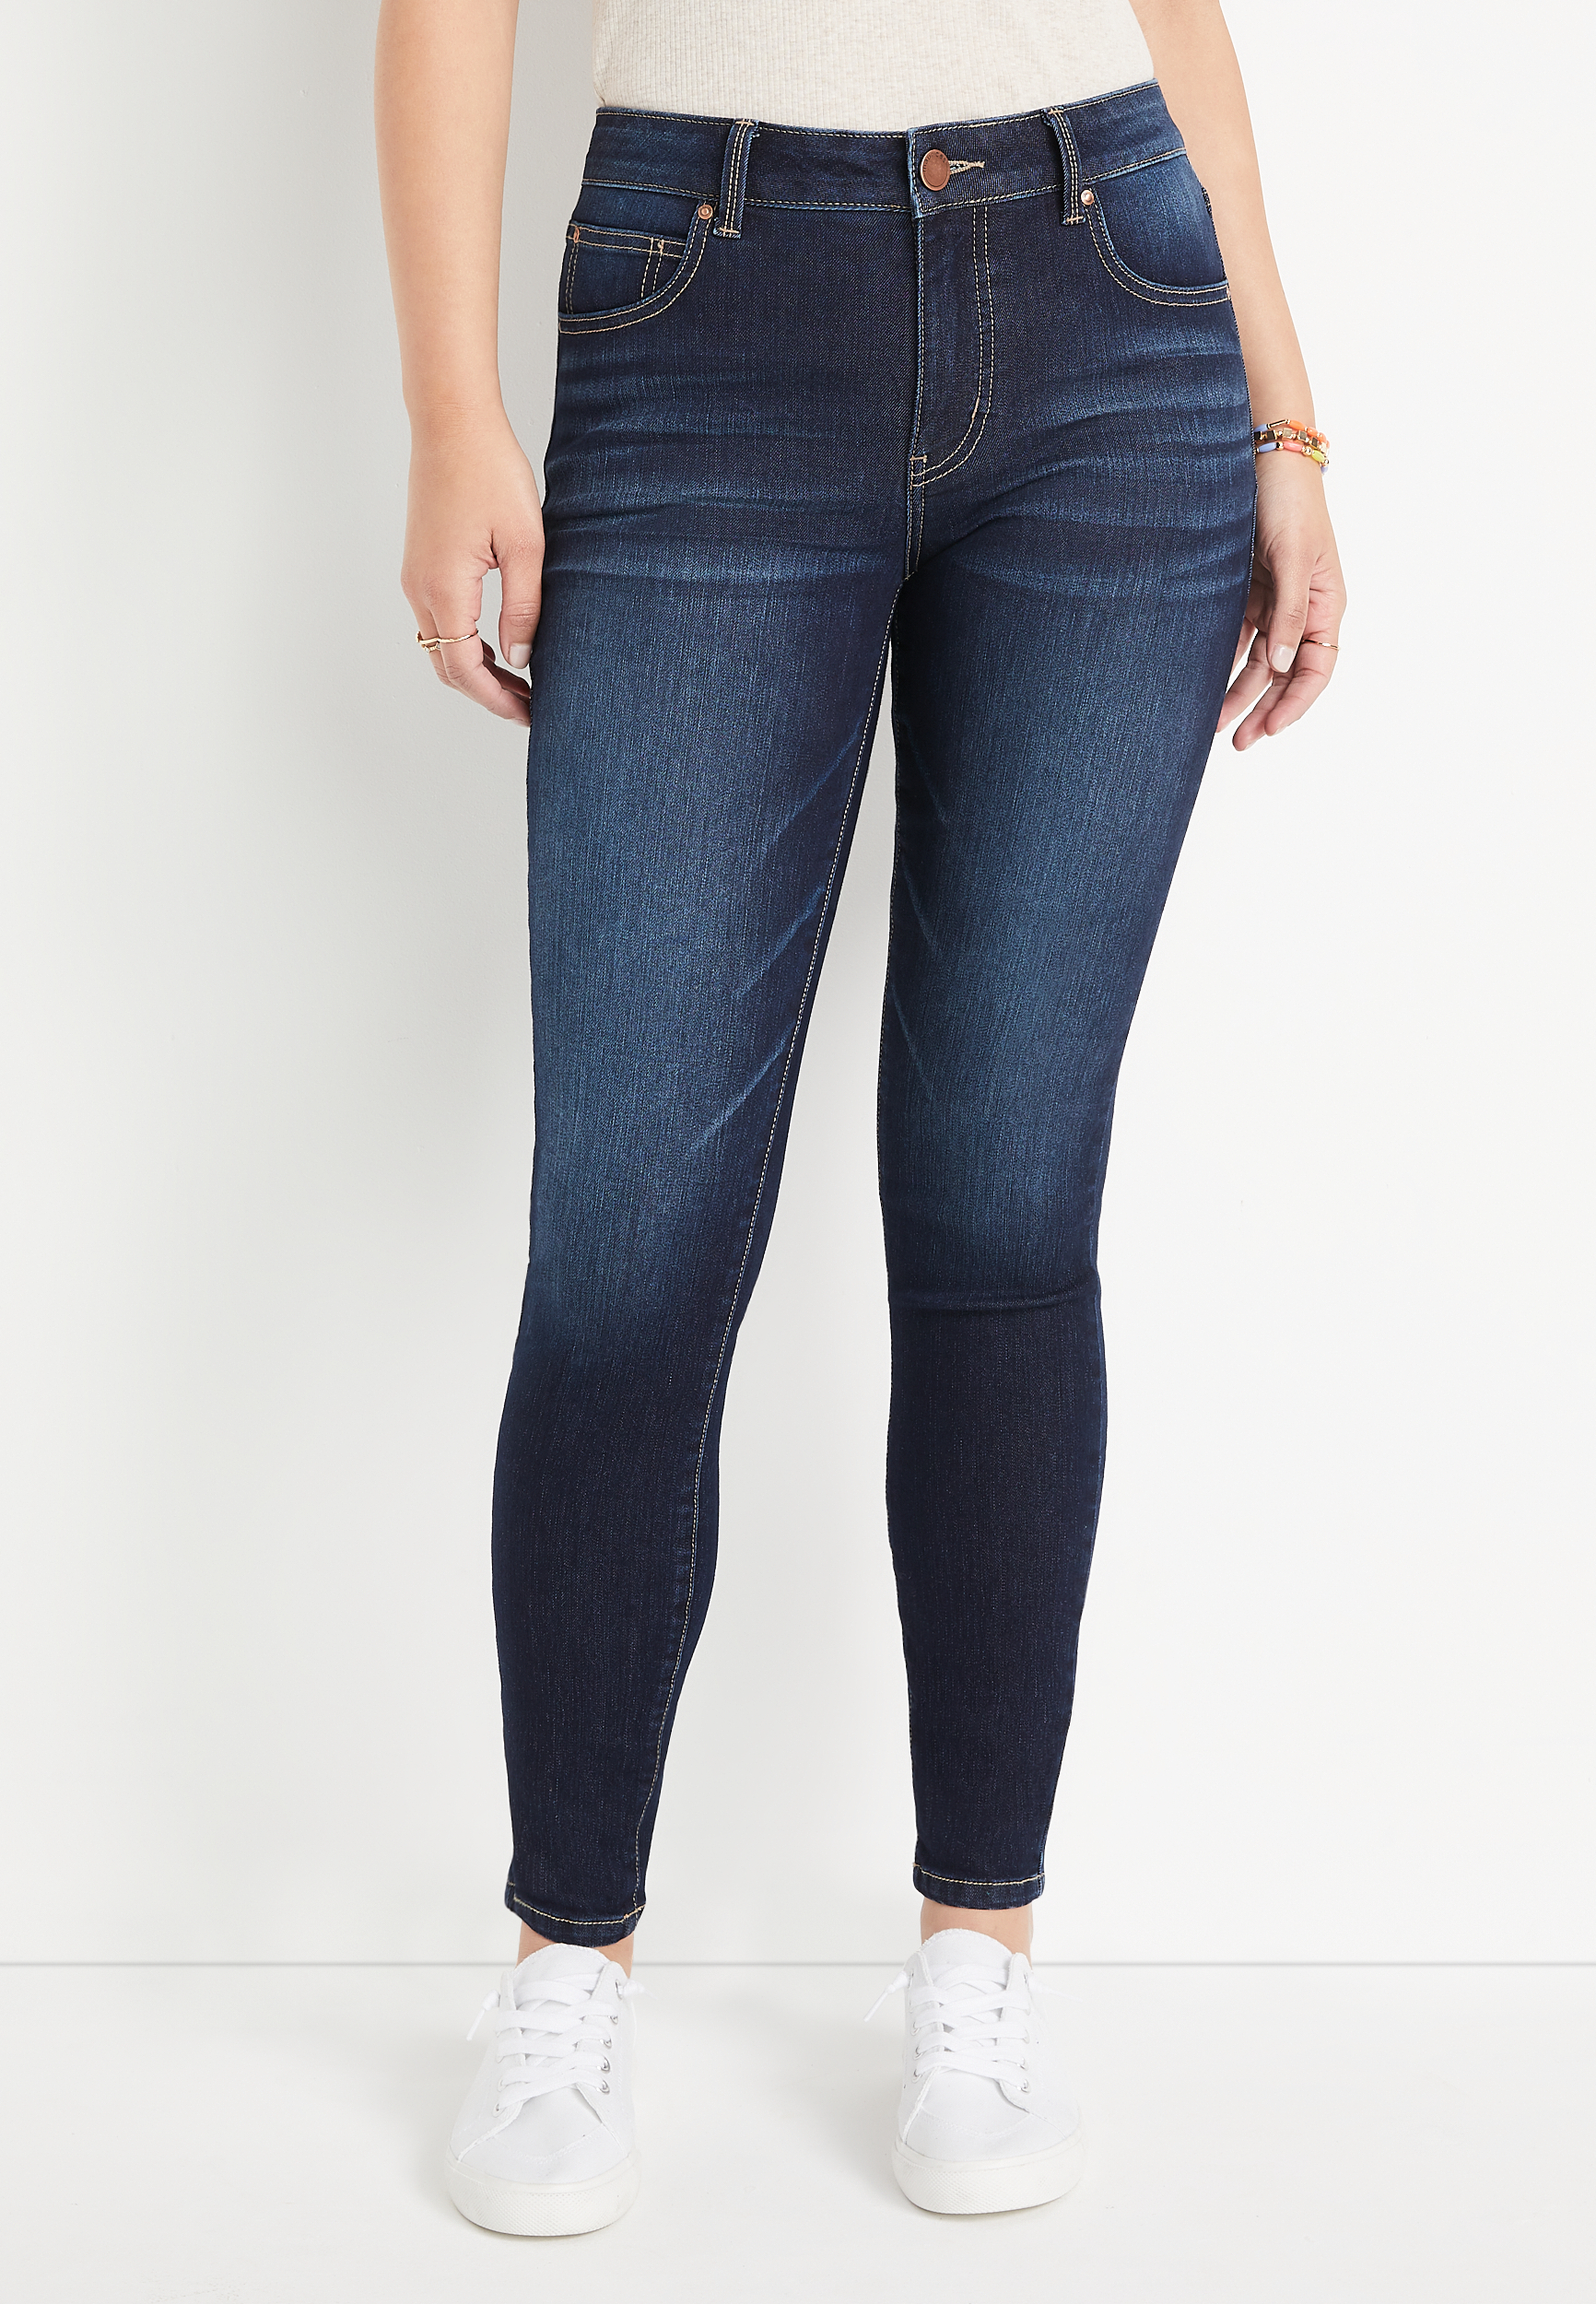 m by maurices™ Everflex™ Super Skinny High Rise Stretch Jean maurices